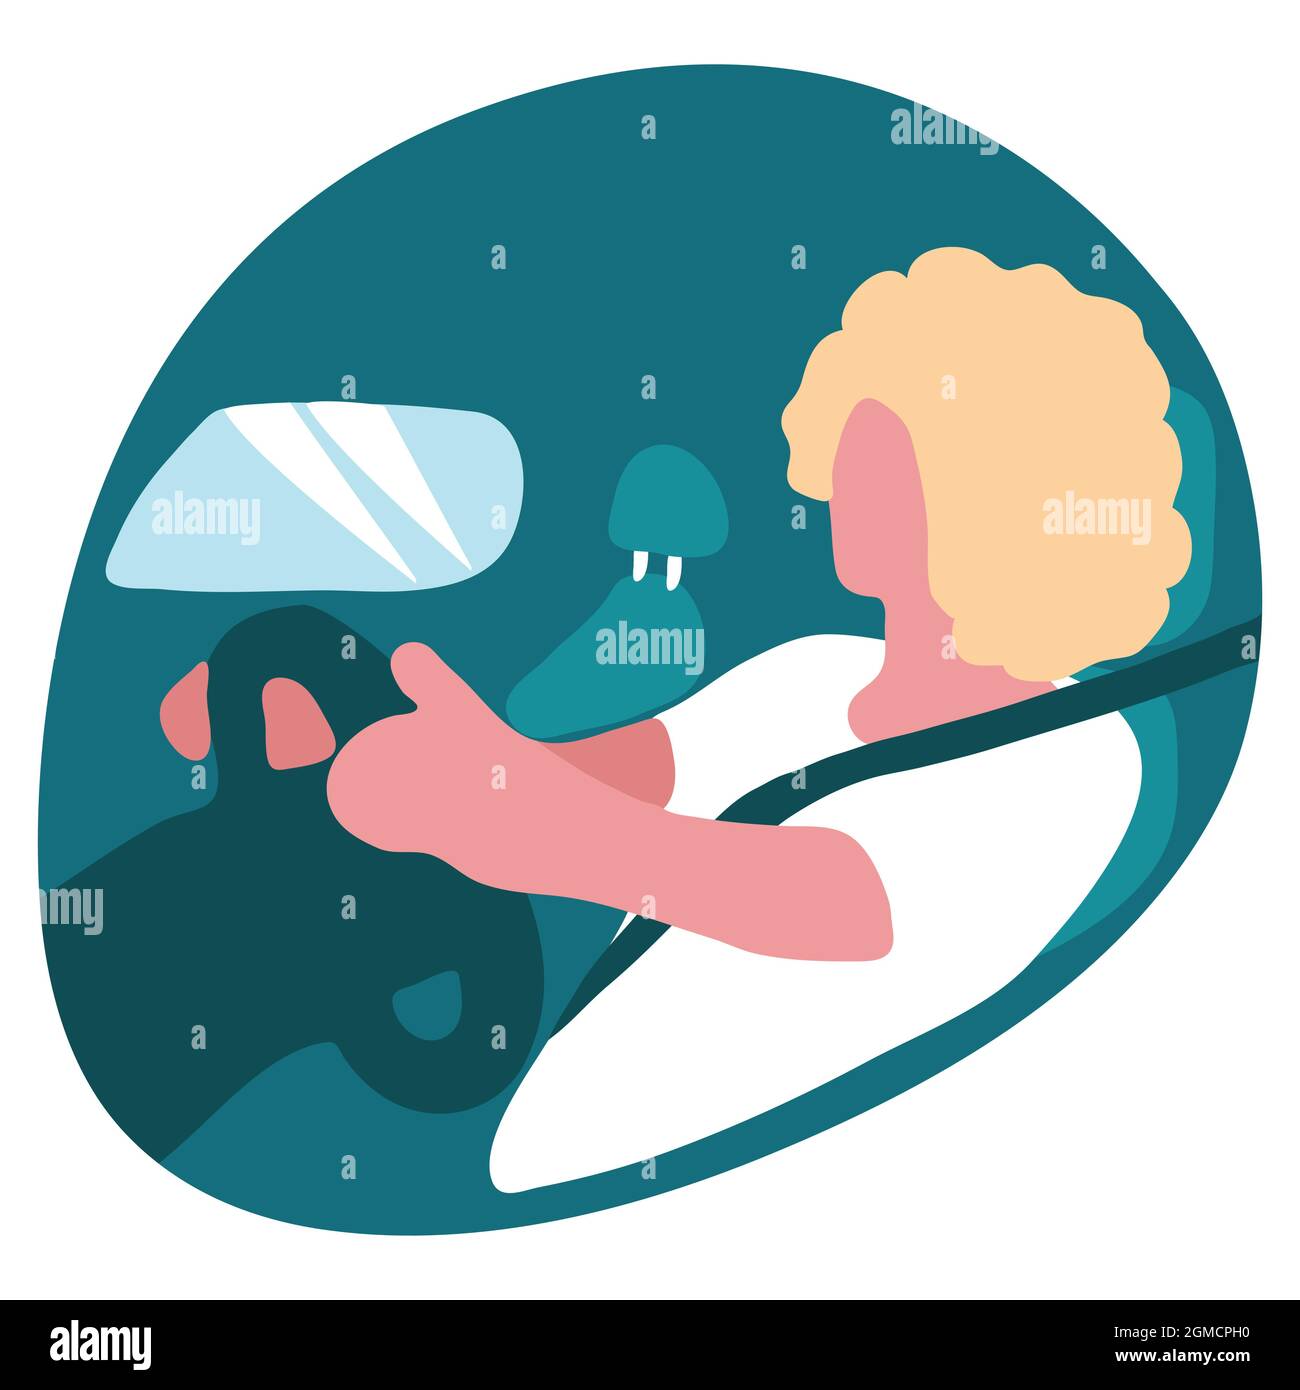 Lady driver illustration Stock Vector